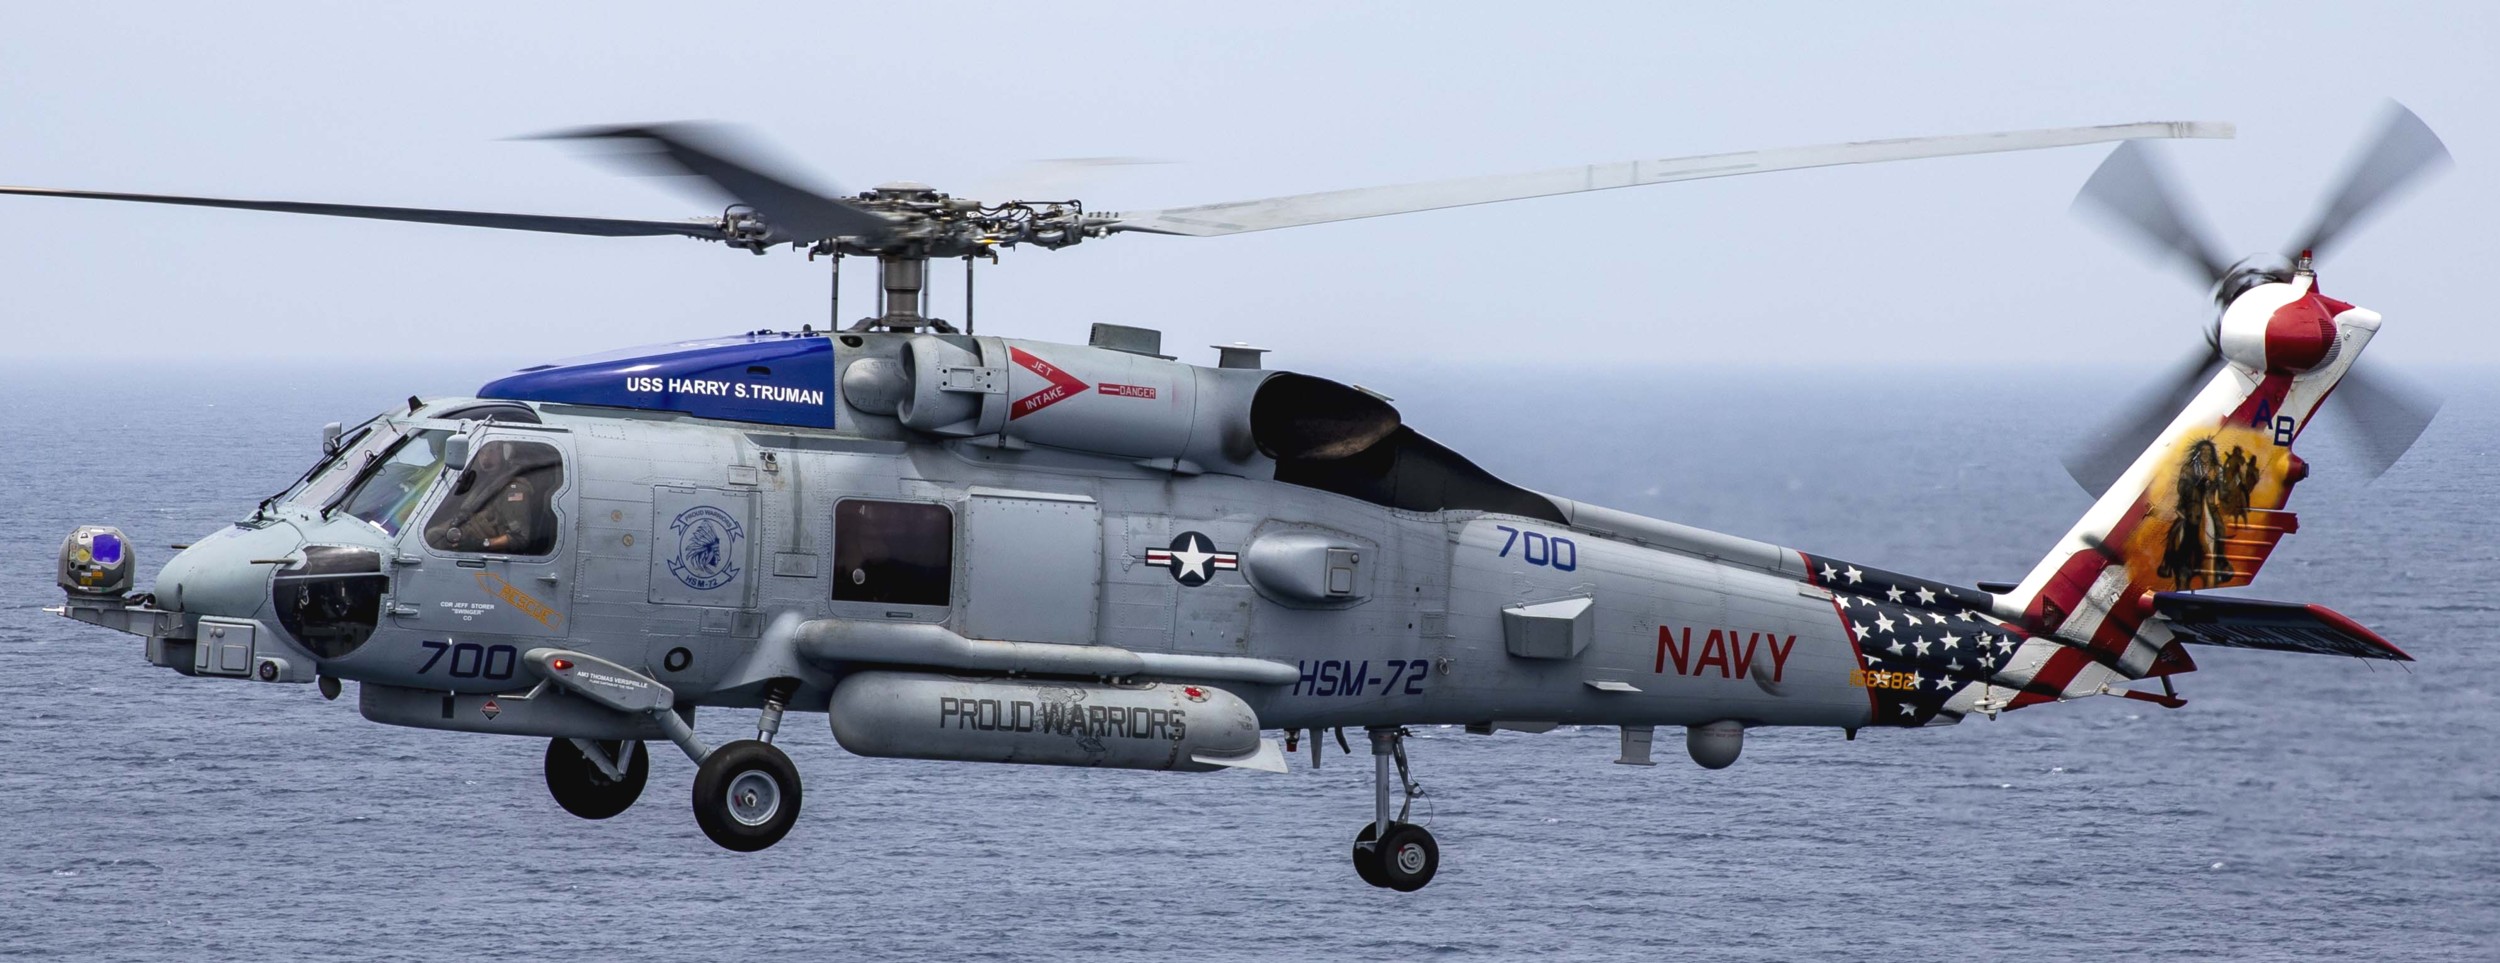 hsm-72 proud warriors helicopter maritime strike squadron us navy mh-60r seahawk 76